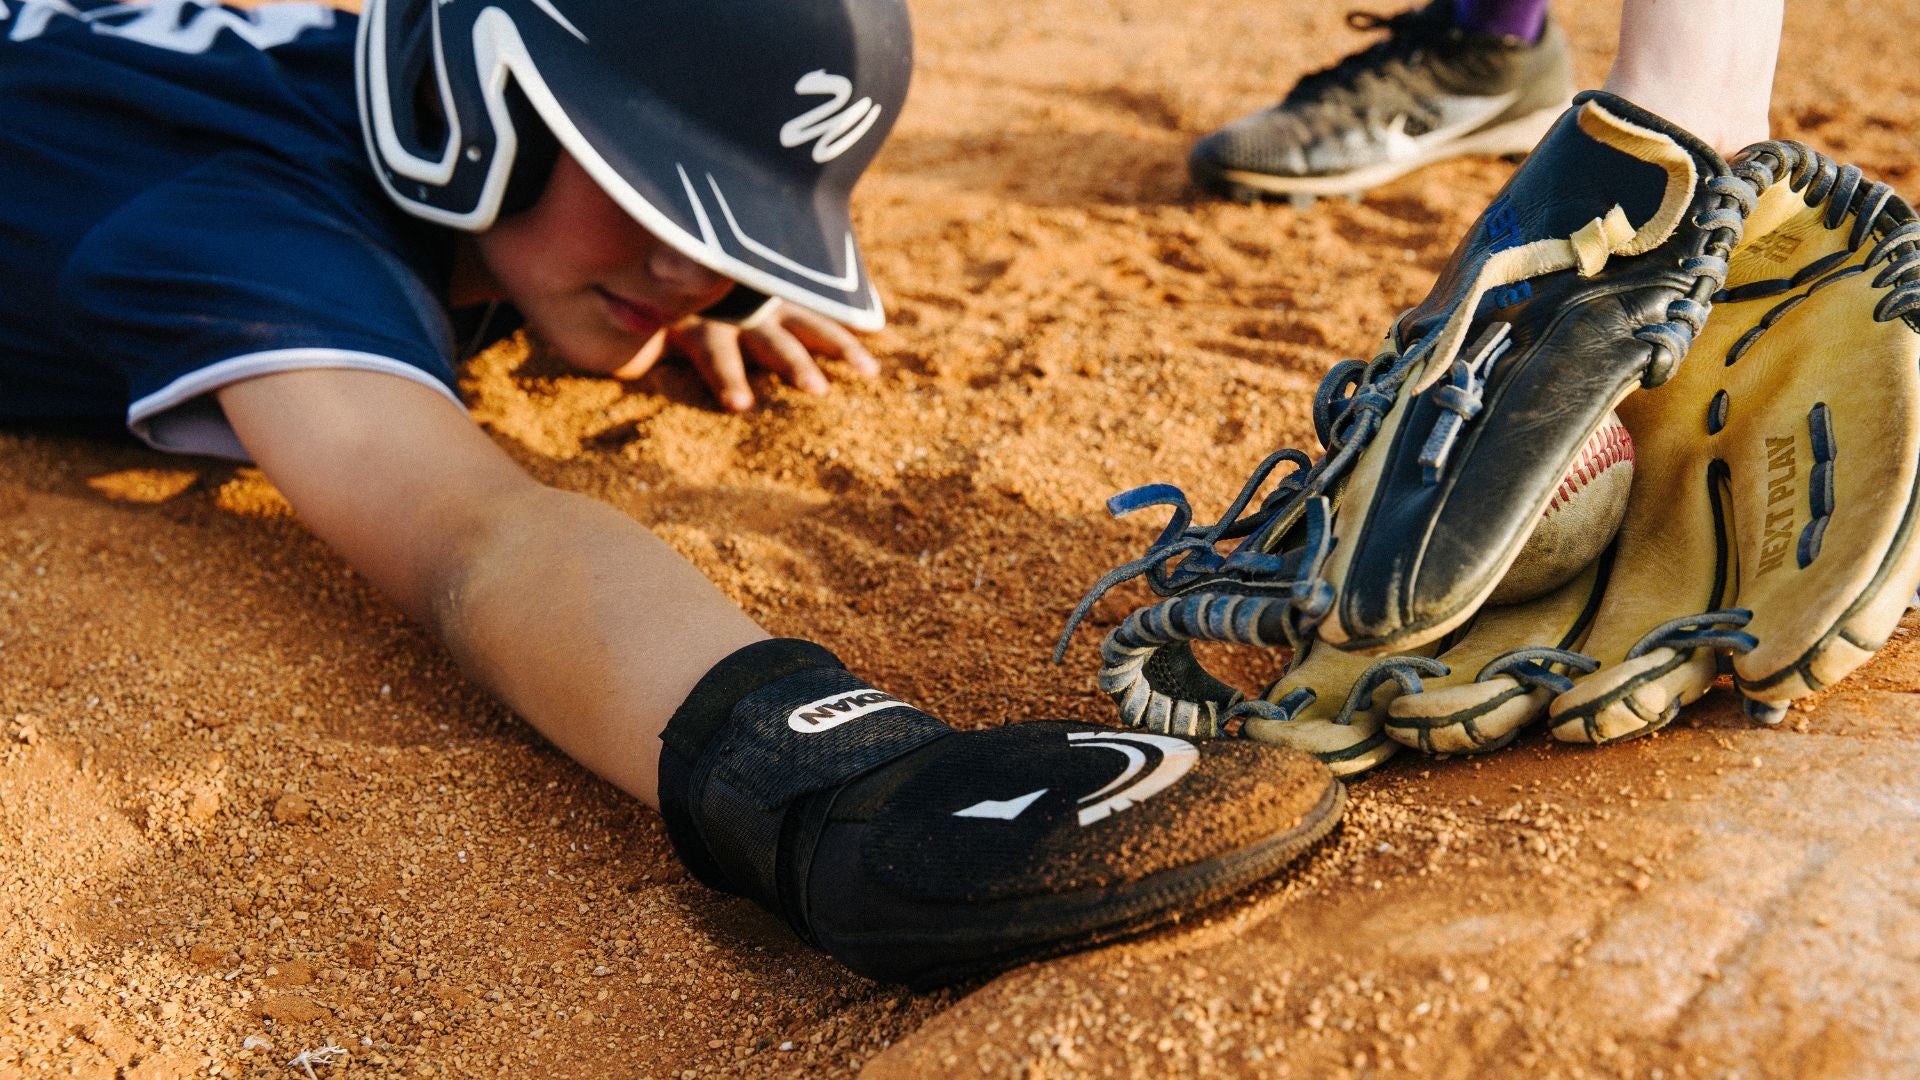 MLB playoffs: Why runners wear oven mitt gloves on base